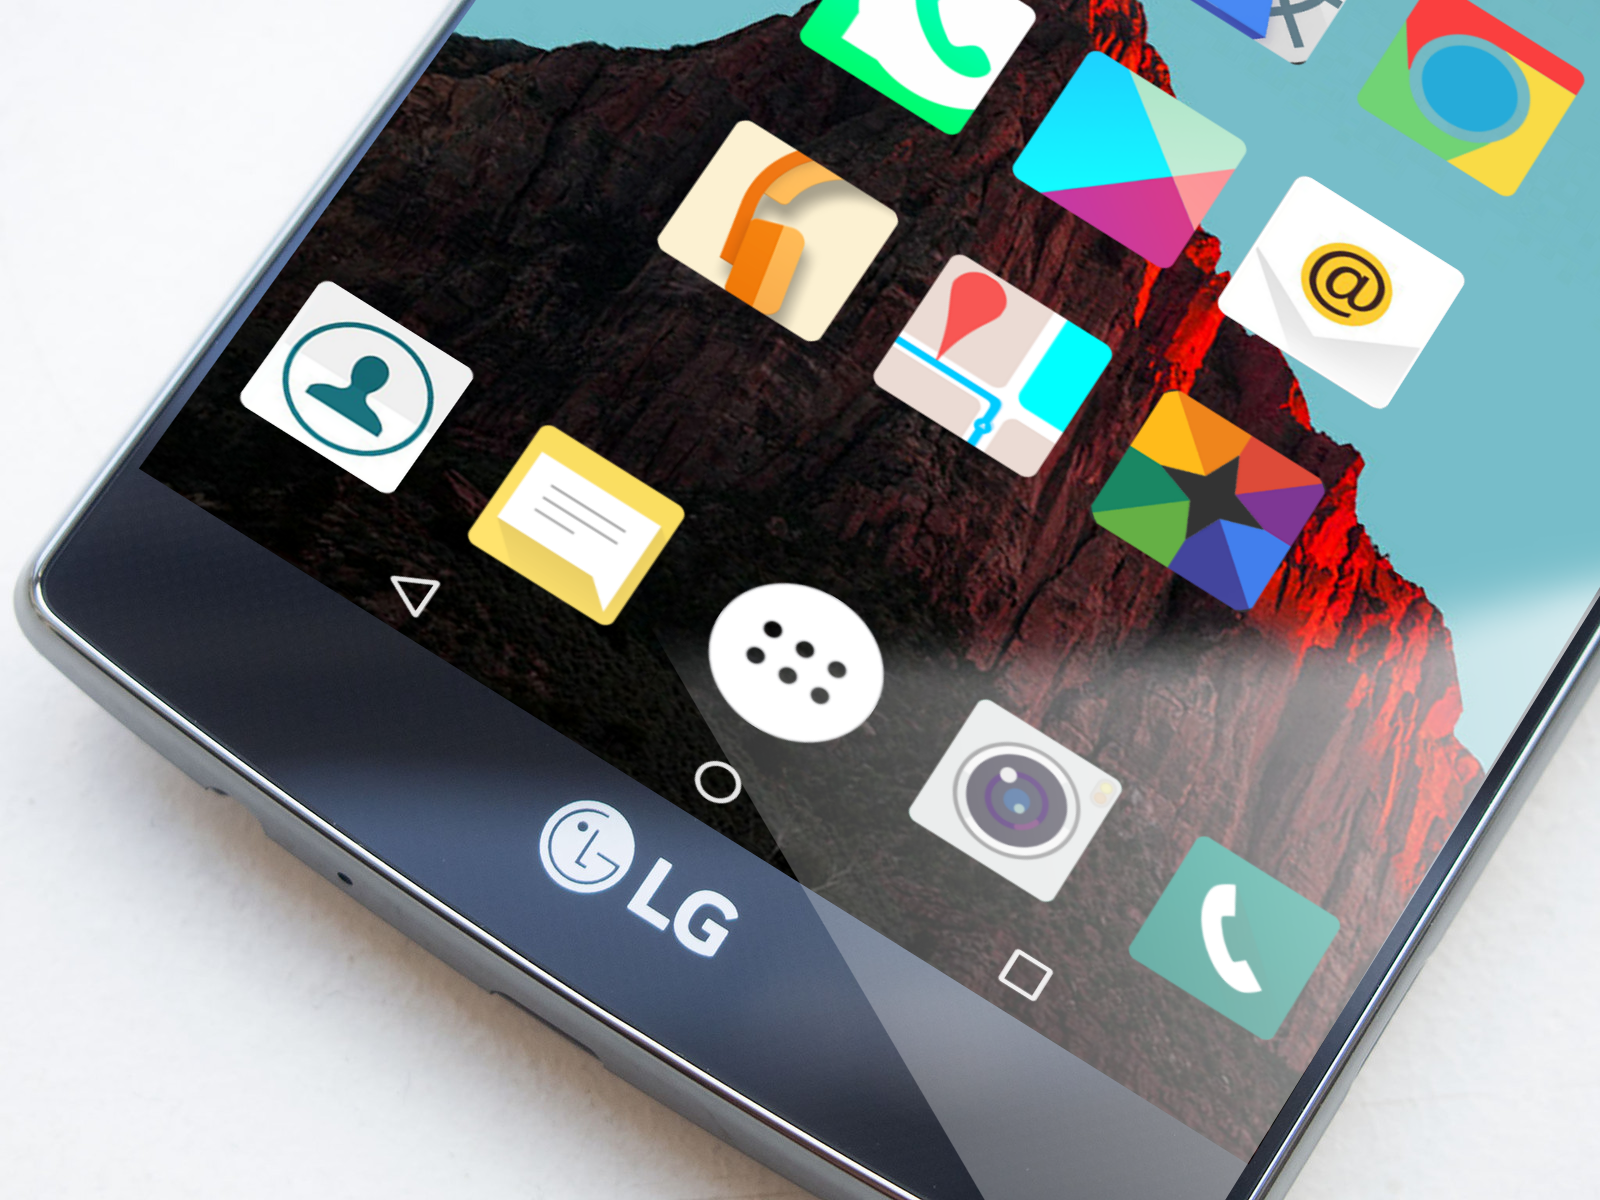 lg g4 wallpaper,gadget,smartphone,electronic device,technology,portable communications device